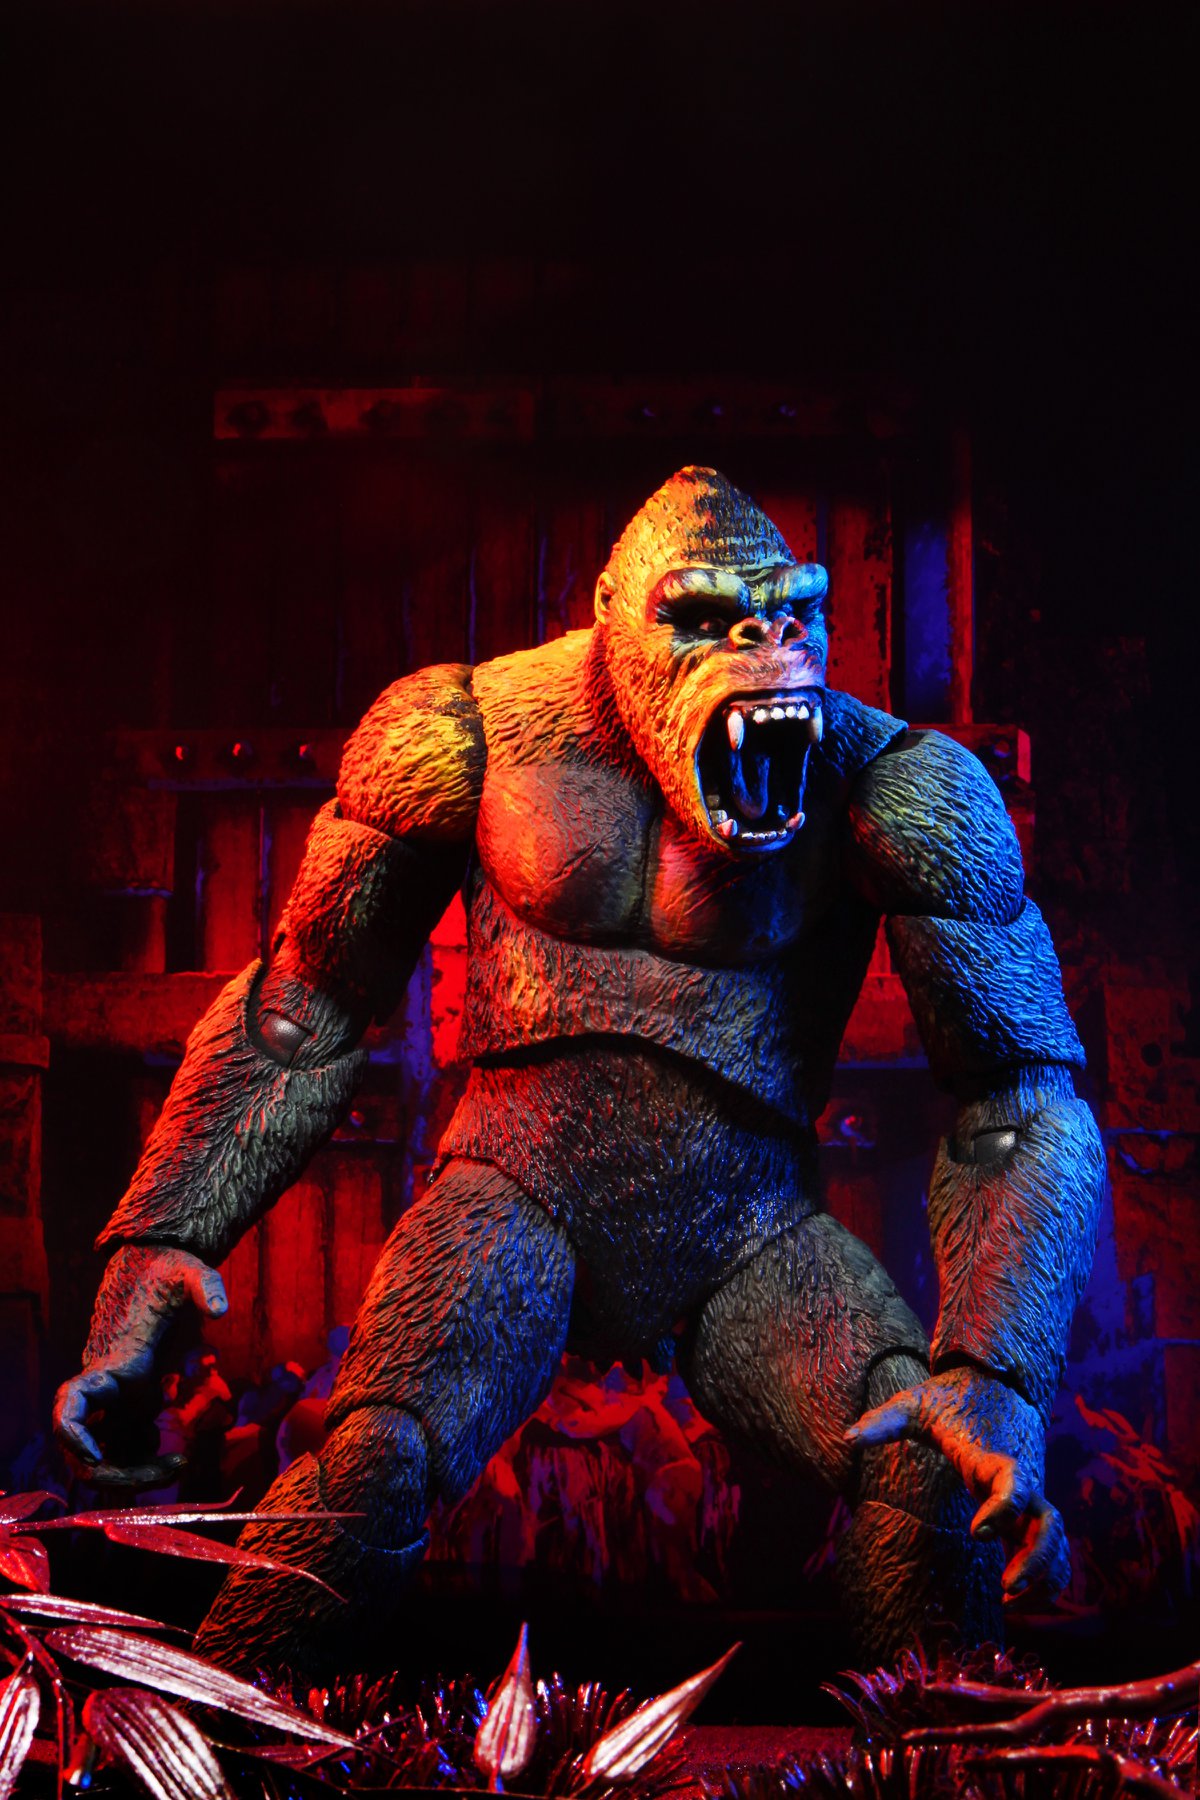 NECA - King Kong Ultimate Illustrated 7 Inch Figure